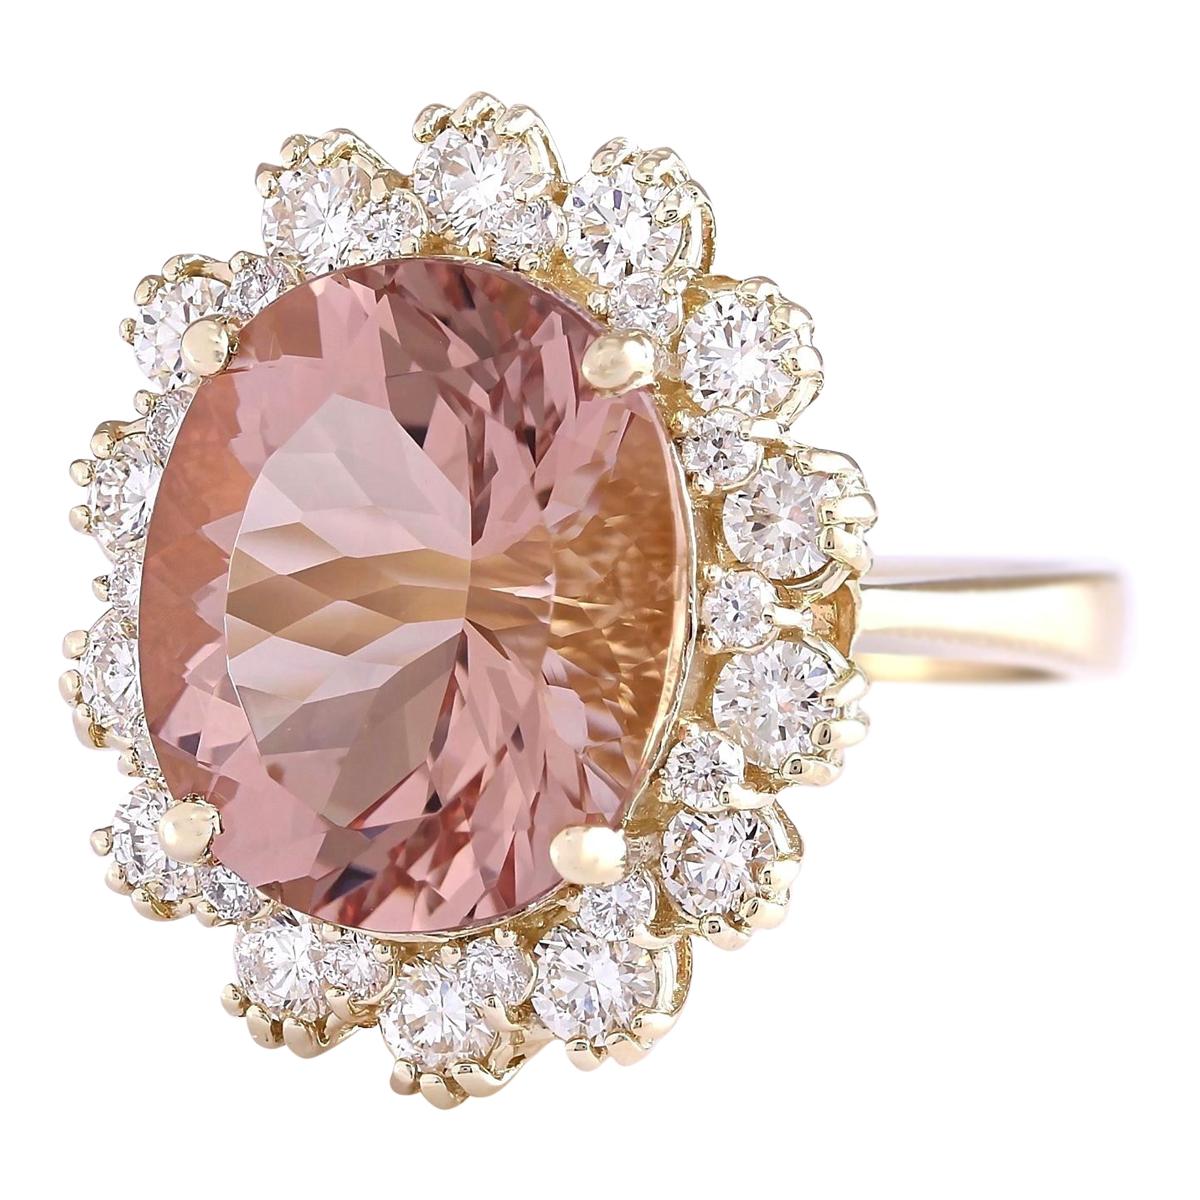 8.65 Carat Natural Morganite 14 Karat Yellow Gold Diamond Ring
Stamped: 14K Yellow Gold
Total Ring Weight: 6.0 Grams
Total Natural Morganite Weight is 7.53 Carat (Measures: 14.00x10.00 mm)
Color: Peach
Total Natural Diamond Weight is 1.12